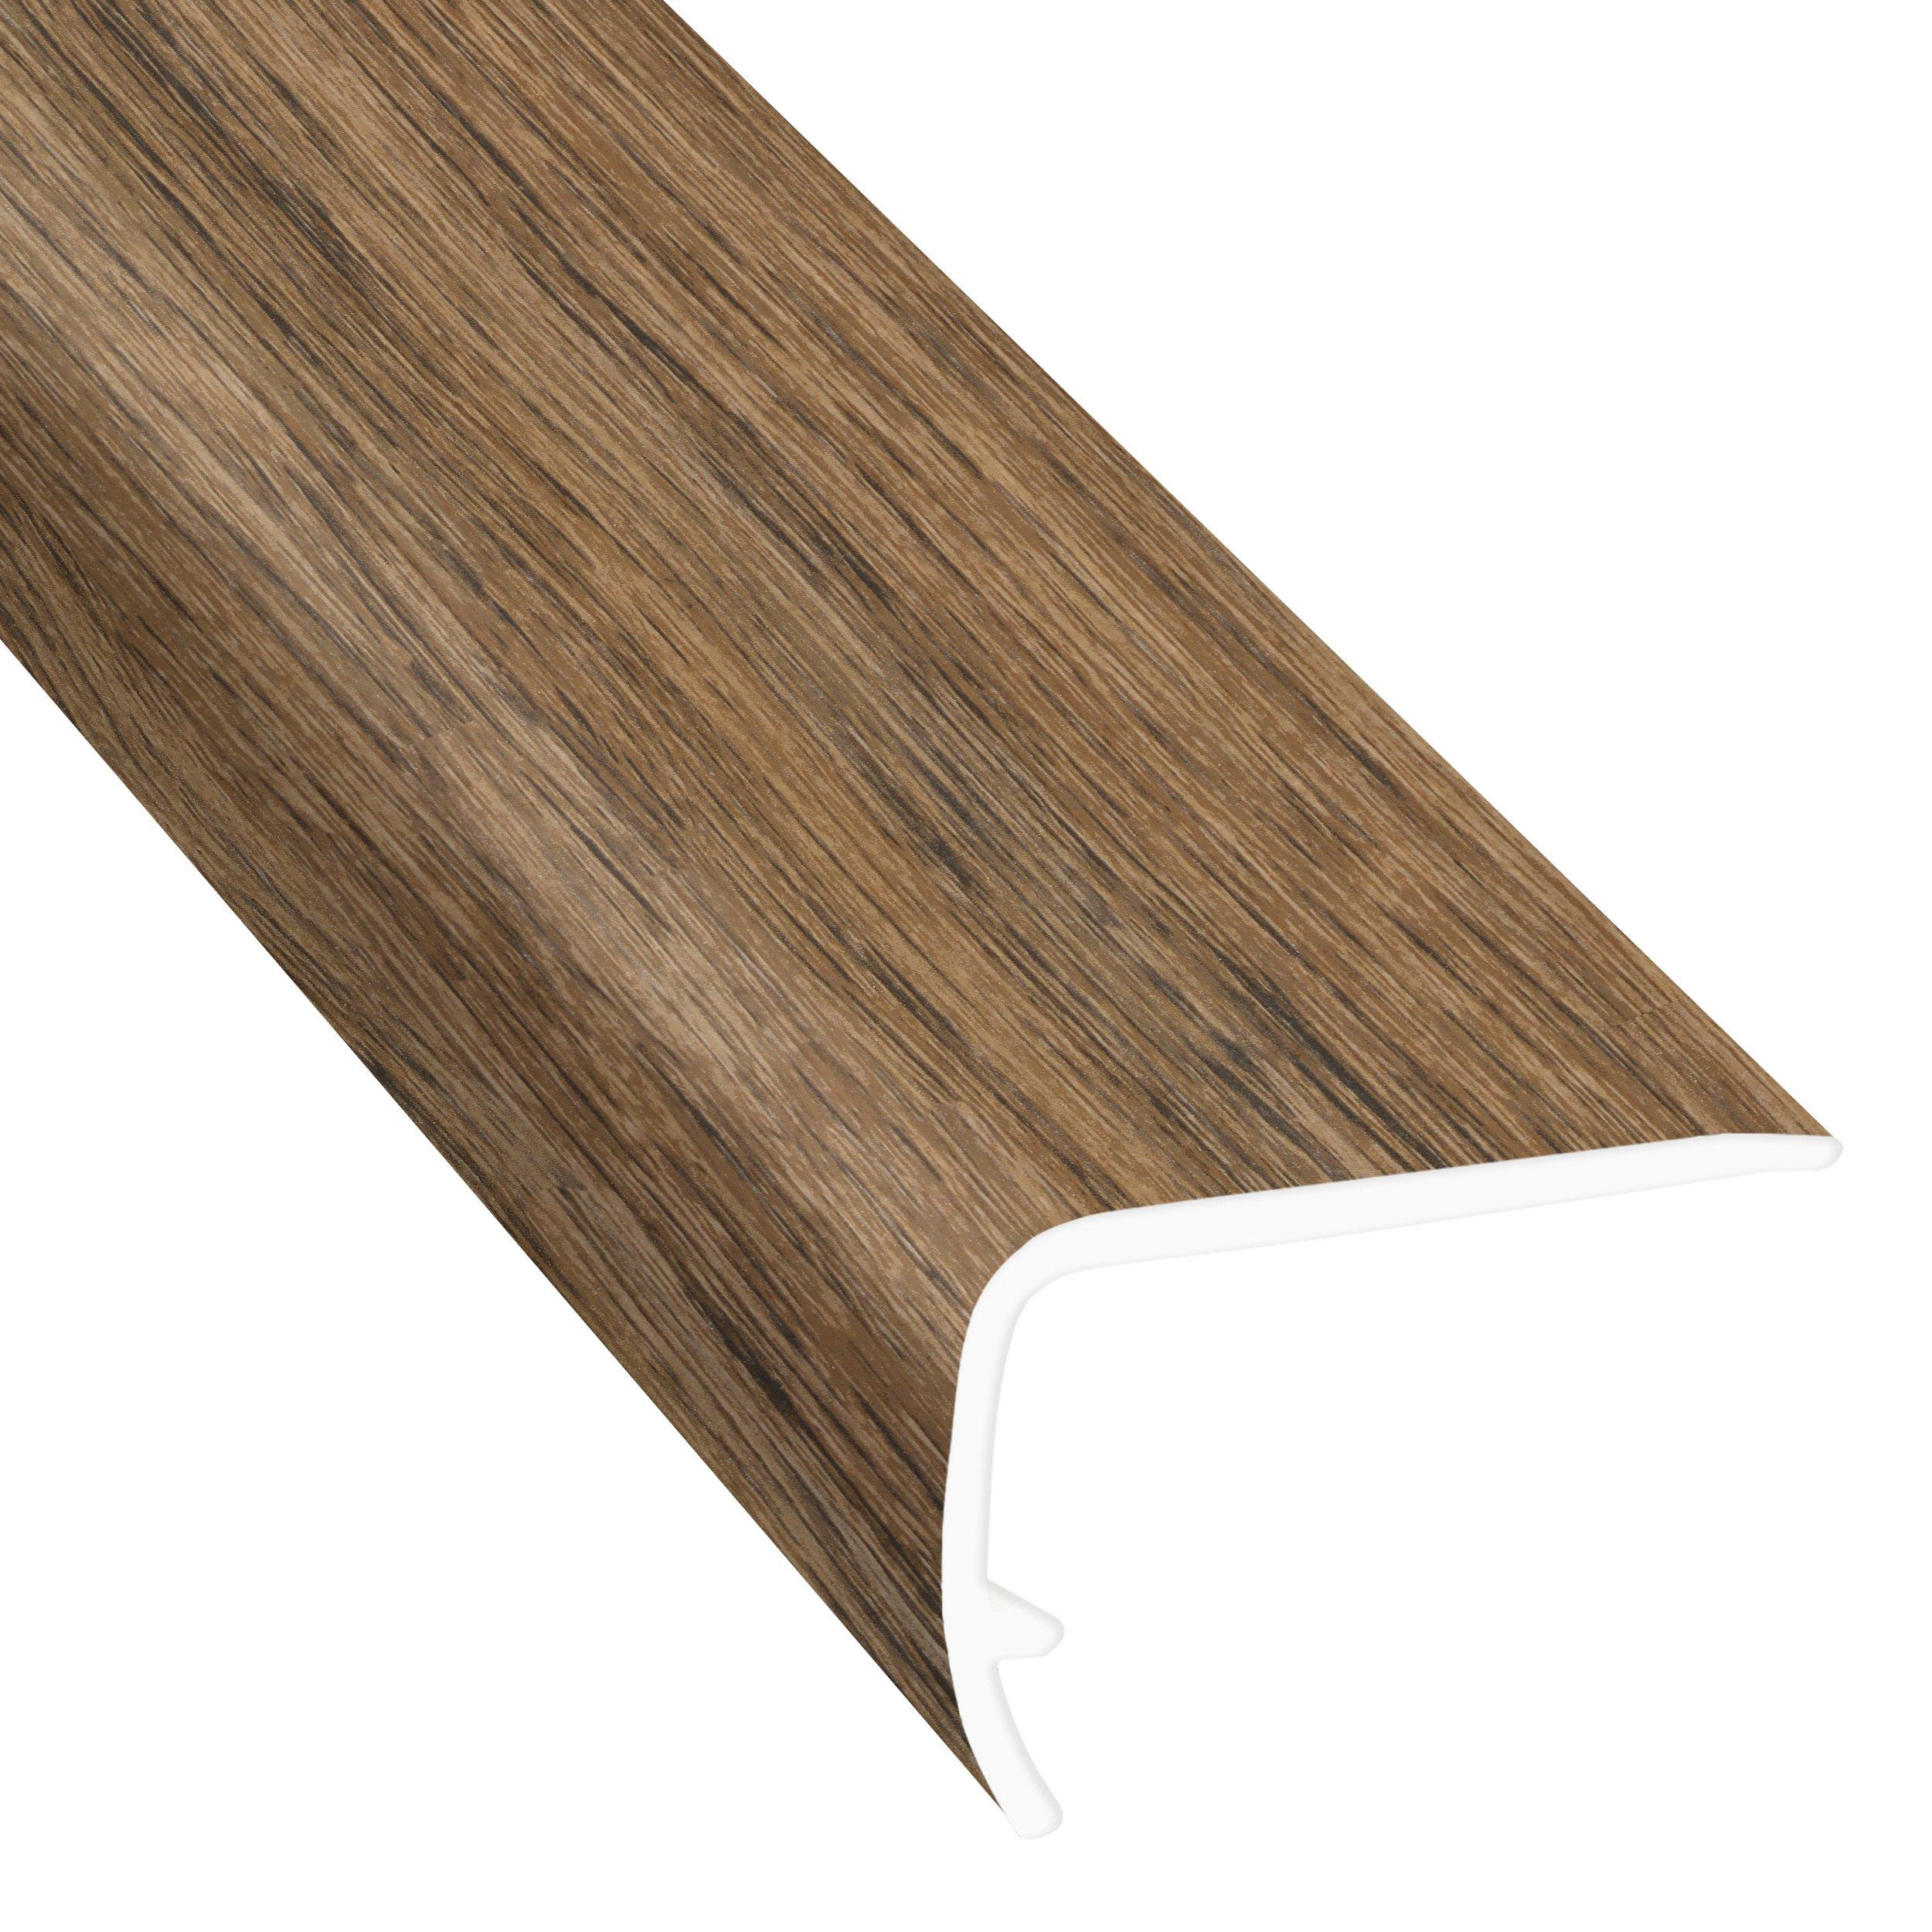 Dolce Oak 94in. Vinyl Overlapping Stair Nose